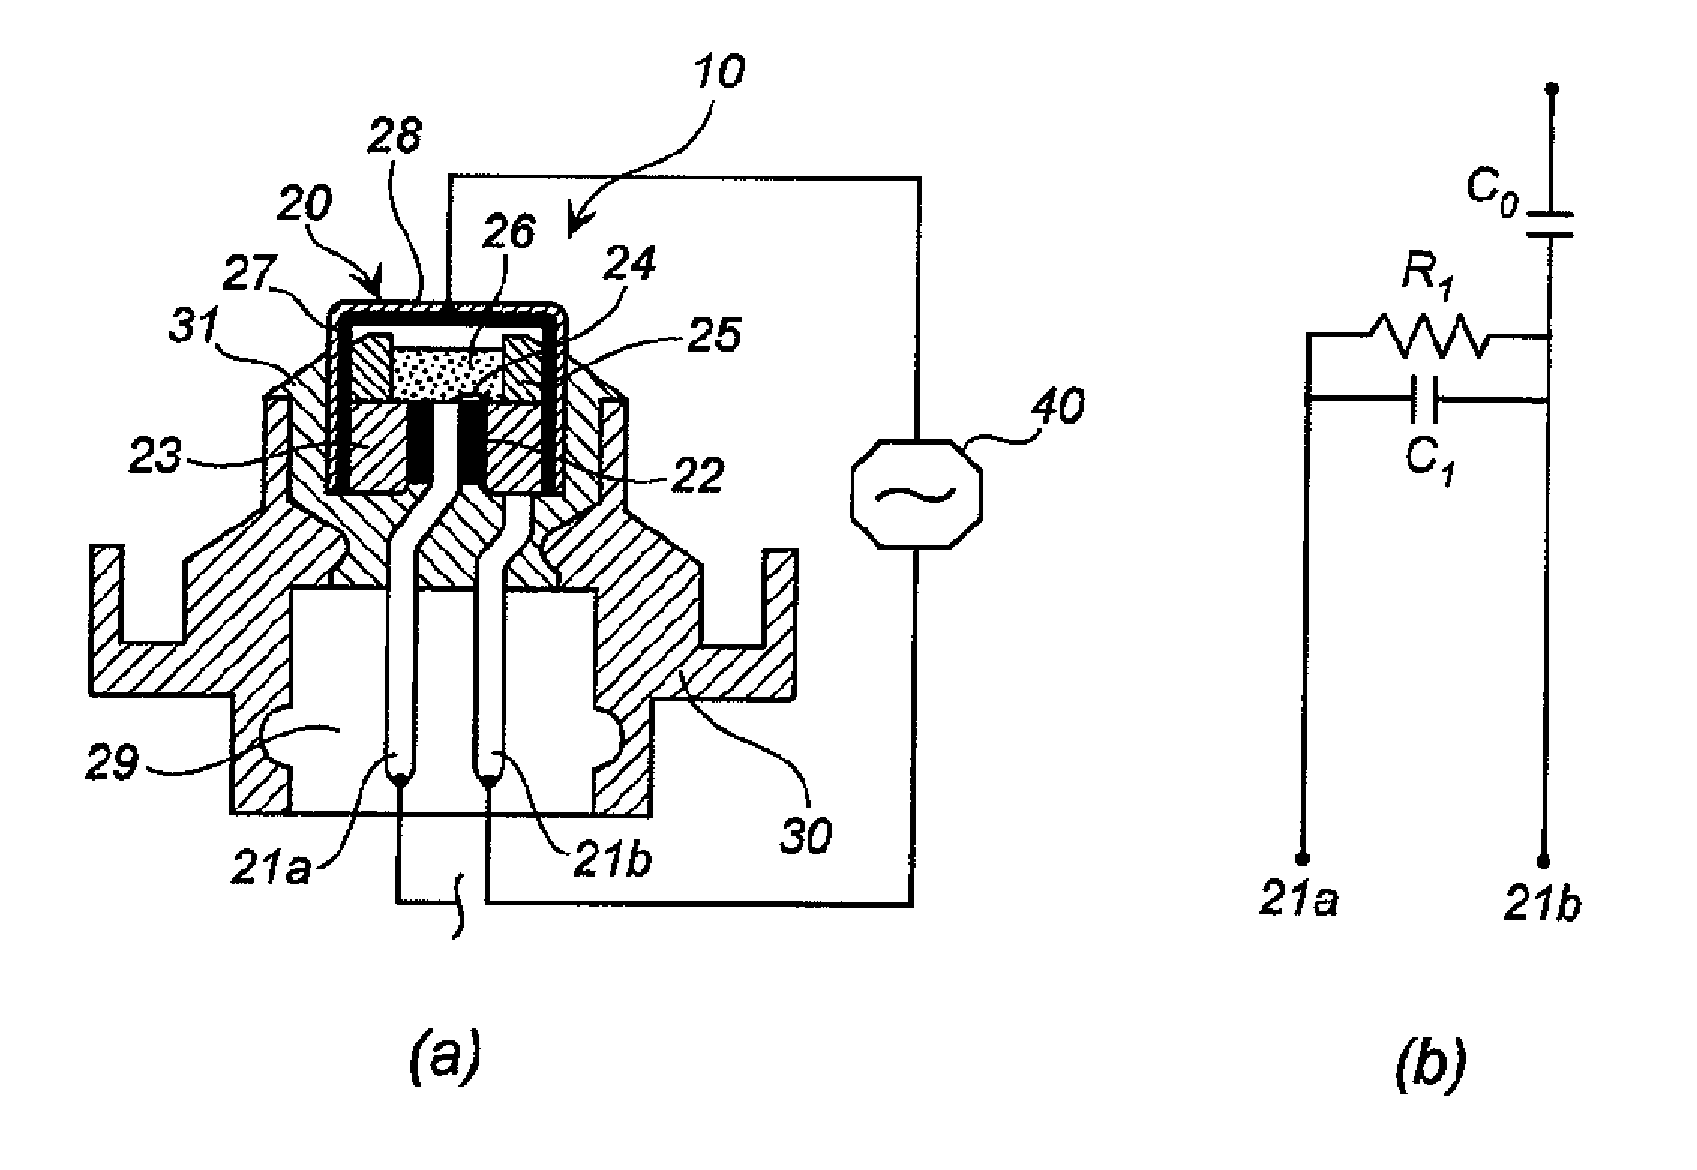 Assembly method for device employing electric ignition